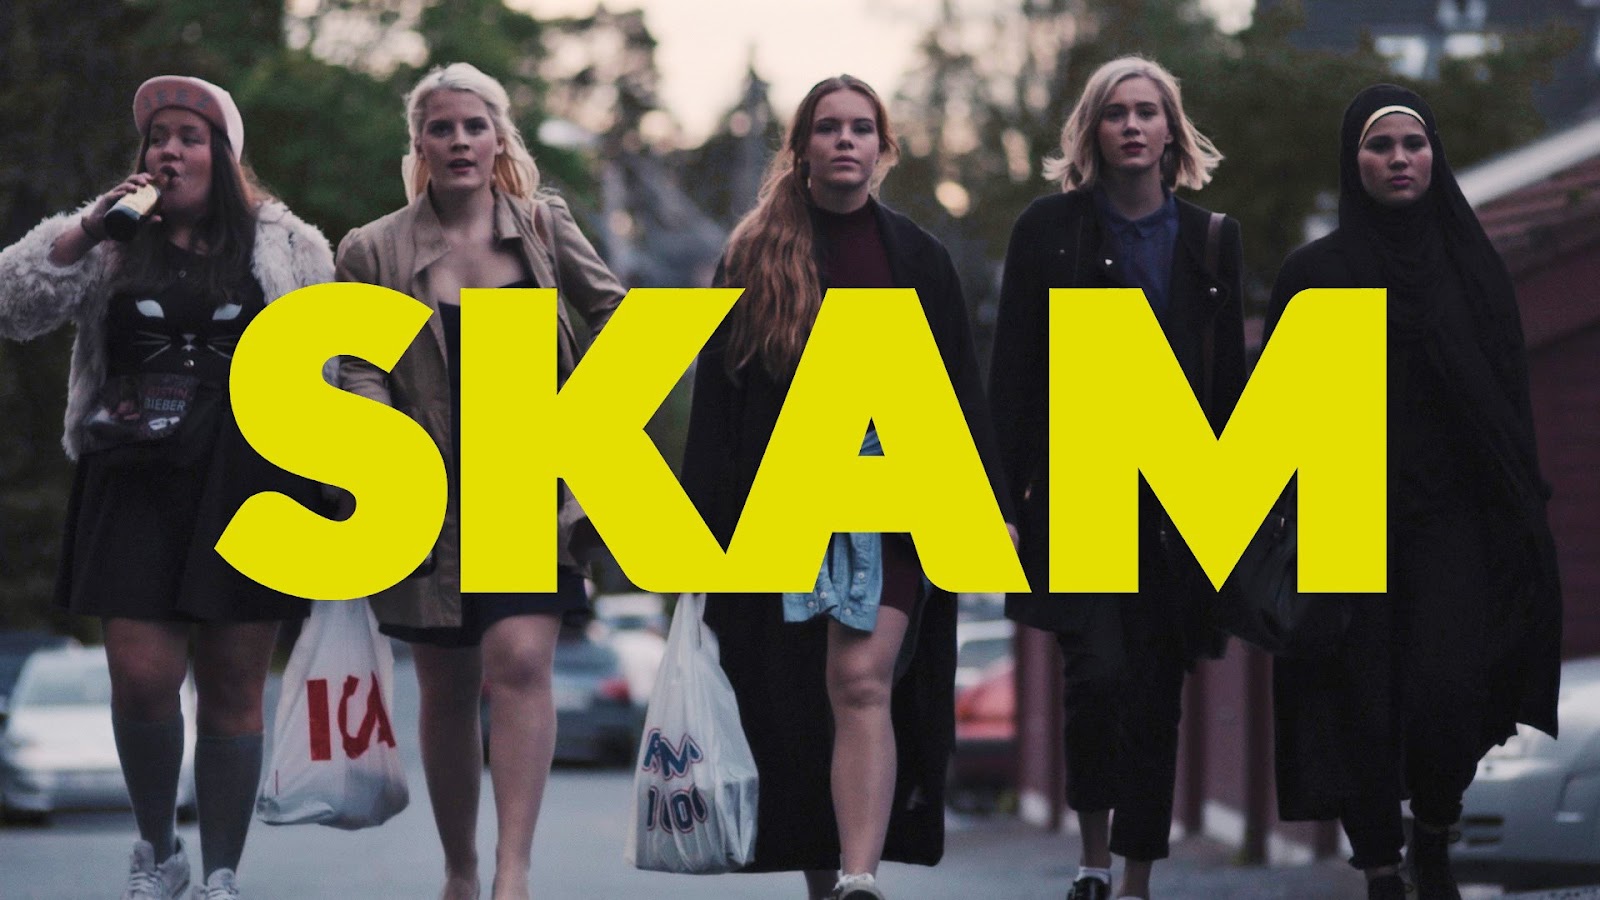 SKAM Norway title card – five teenage girls in modern street clothes, Chris, Vilde, Eva, Noora, and Sana are walking side-by-side down a road. Chris is drinking from a glass bottle, and Vilde and Eva are carrying full plastic bags. Over the image is the text SKAM in bold yellow letters.